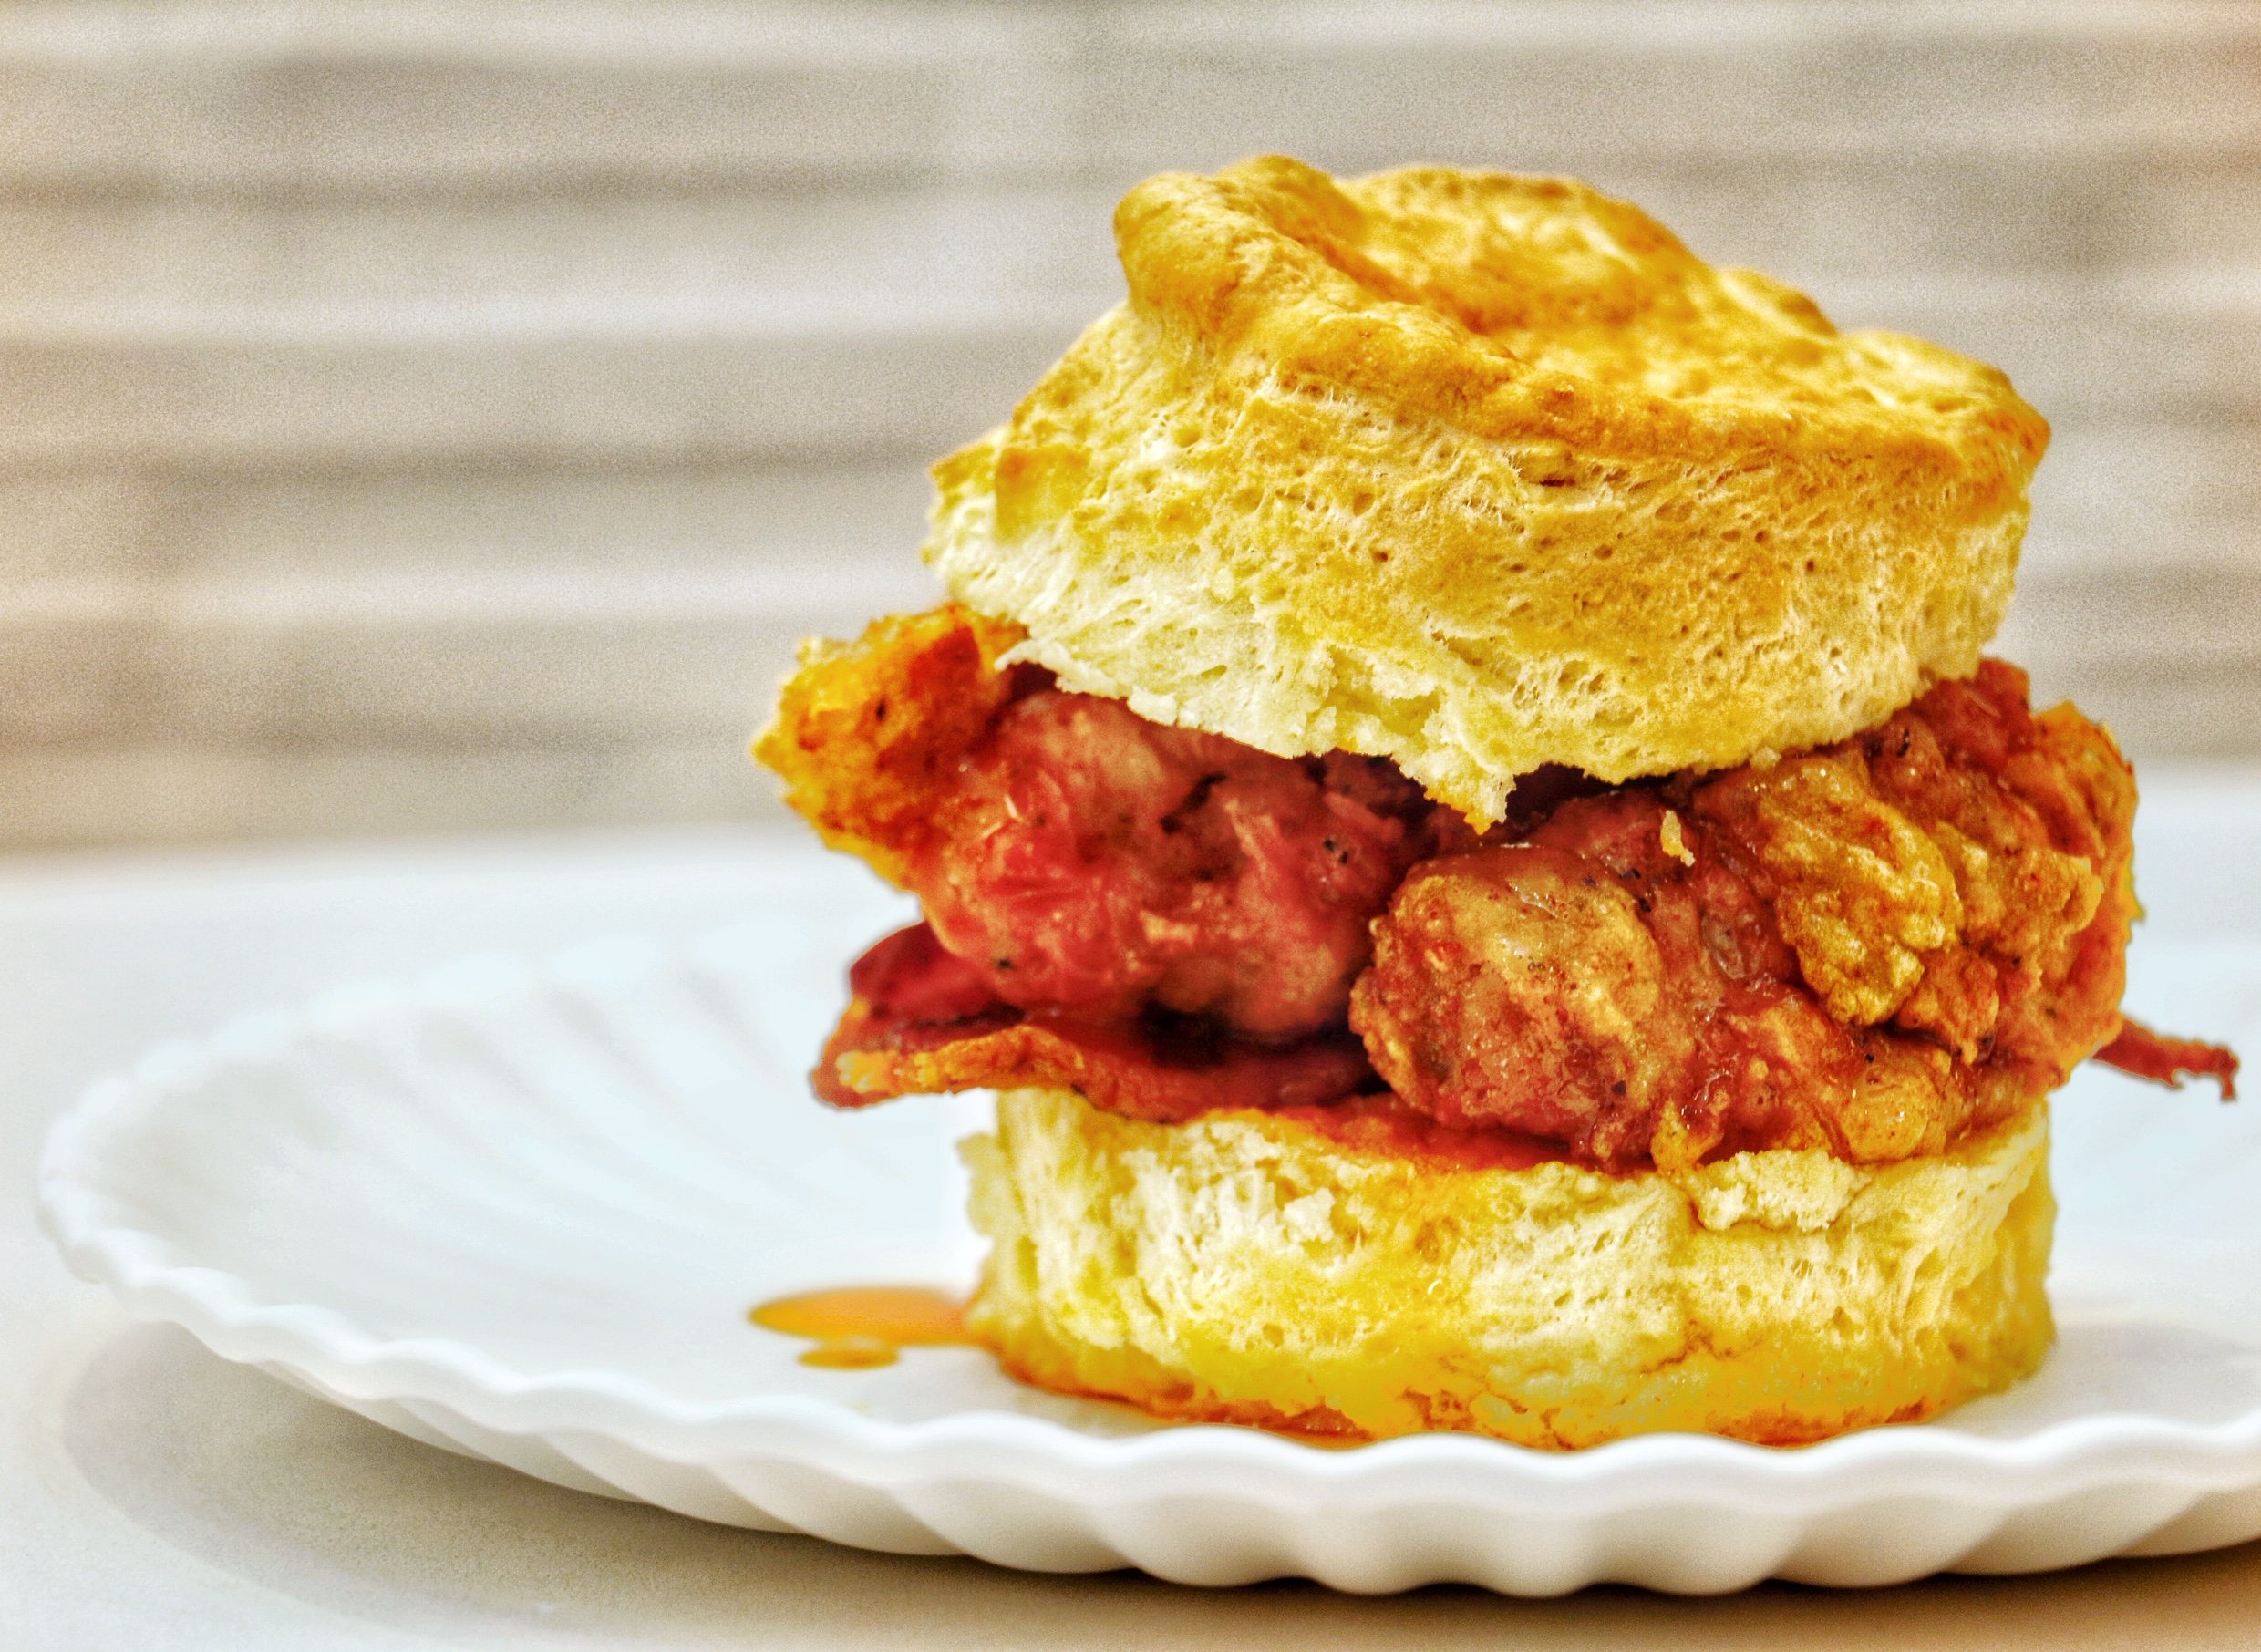 Fried chicken biscuit sandwich at Mason Dixie Biscuit Co. Photograph by Jai Williams. 